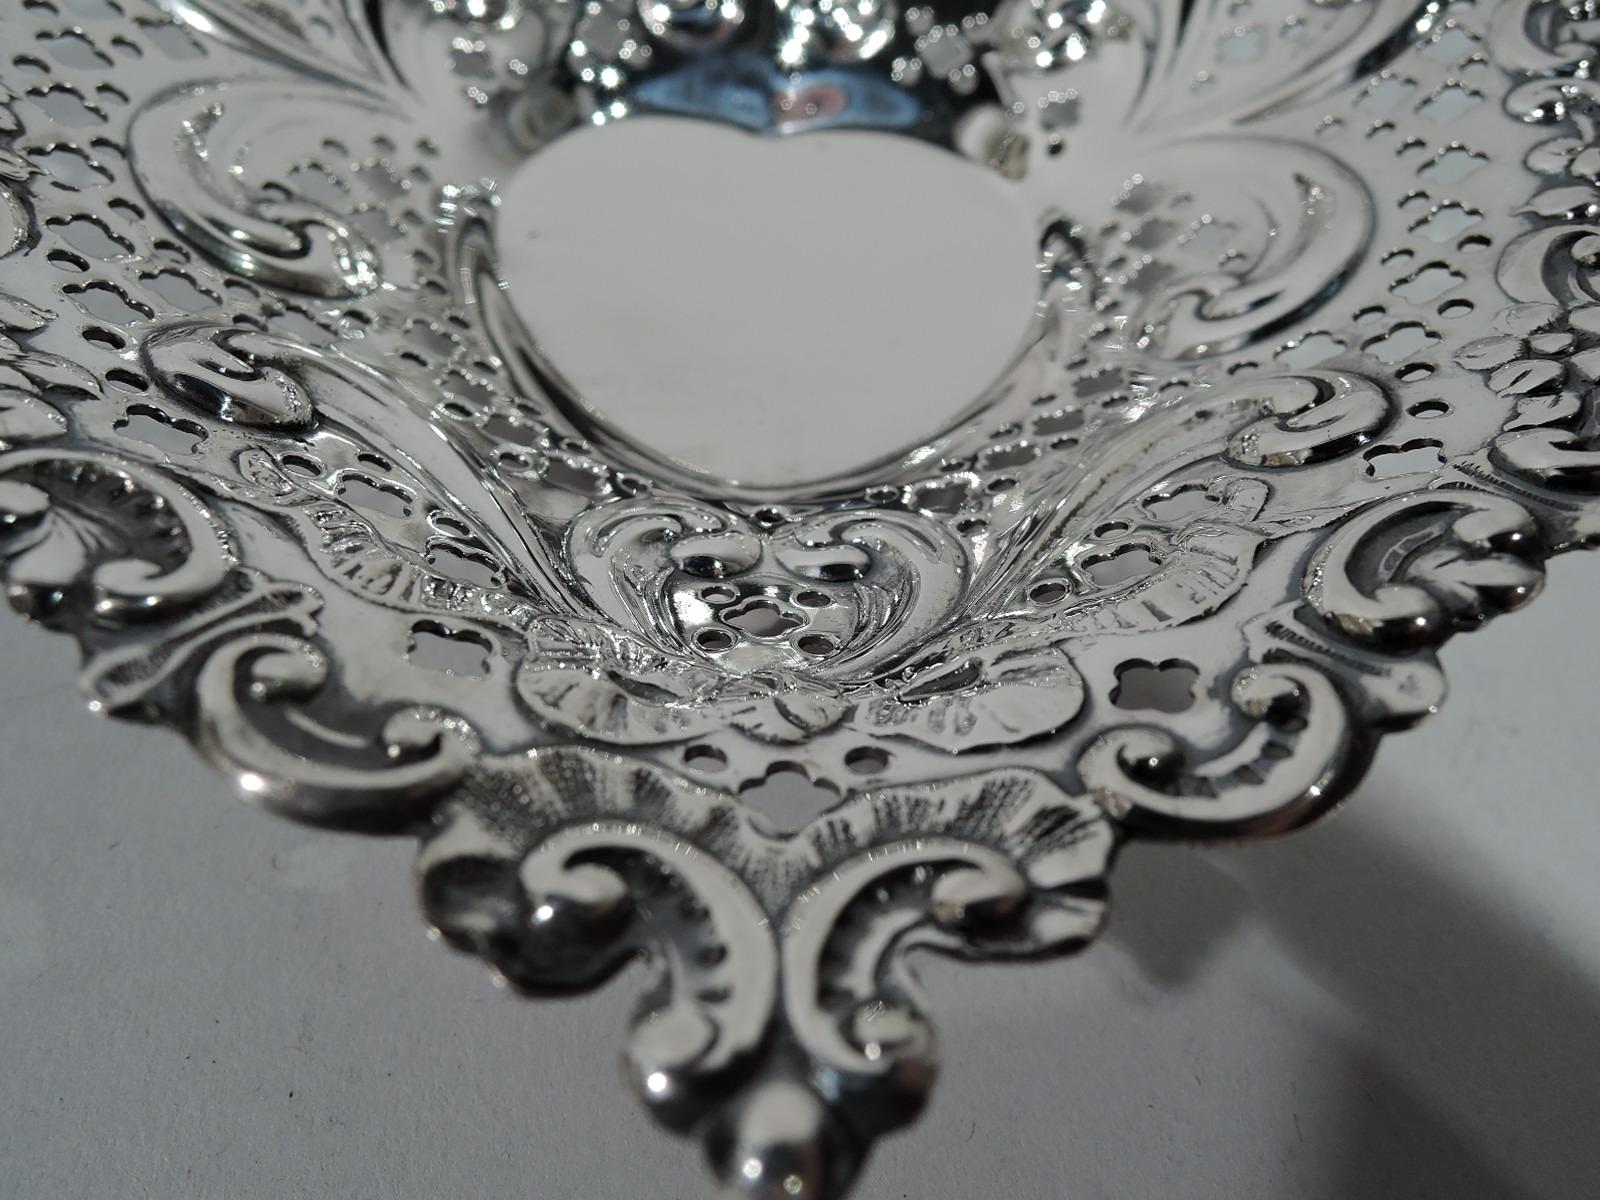 20th Century Old-Fashioned and Romantic Sterling Silver Heart Dish Bowl by Gorham